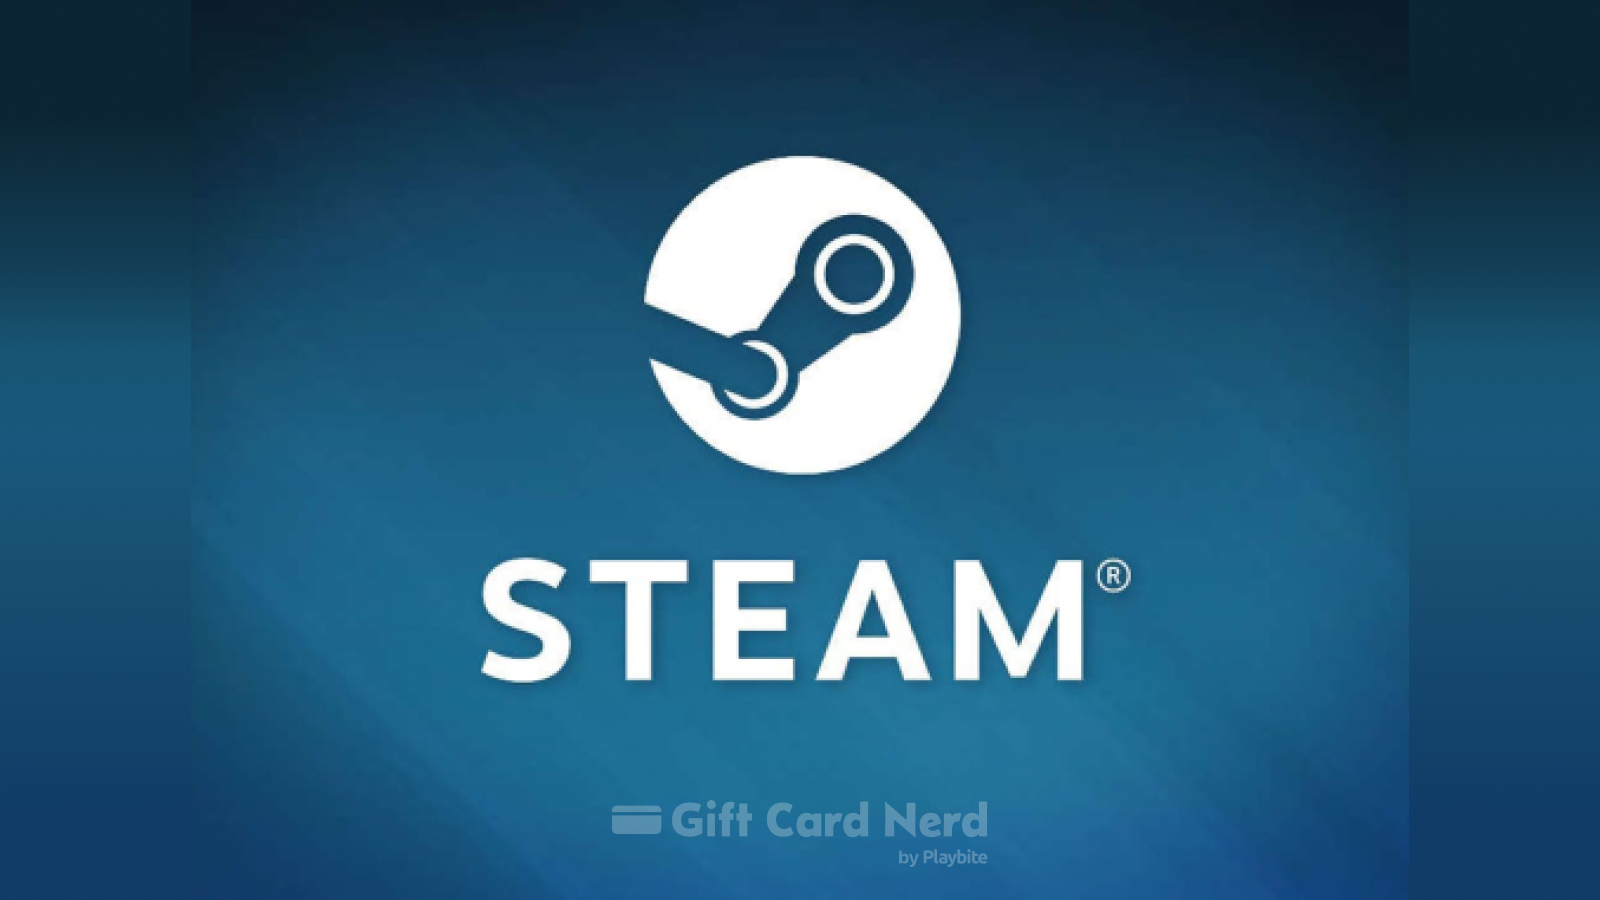 Can I Use a Steam Gift Card on Roblox?